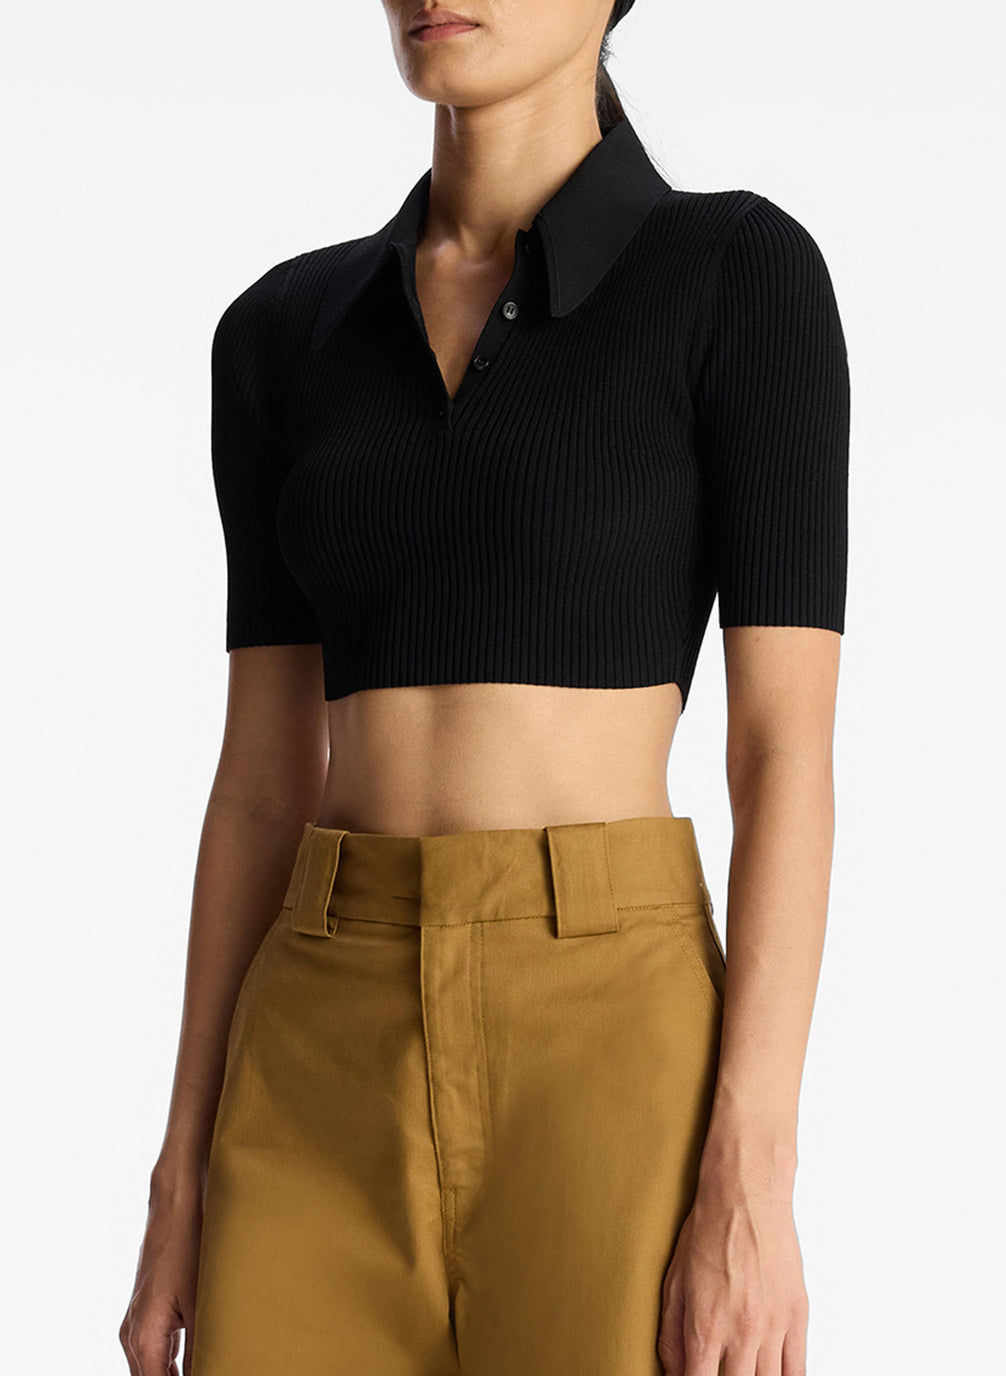 detail view of woman wearing black cropped collared knit shirt and tan cargo pants